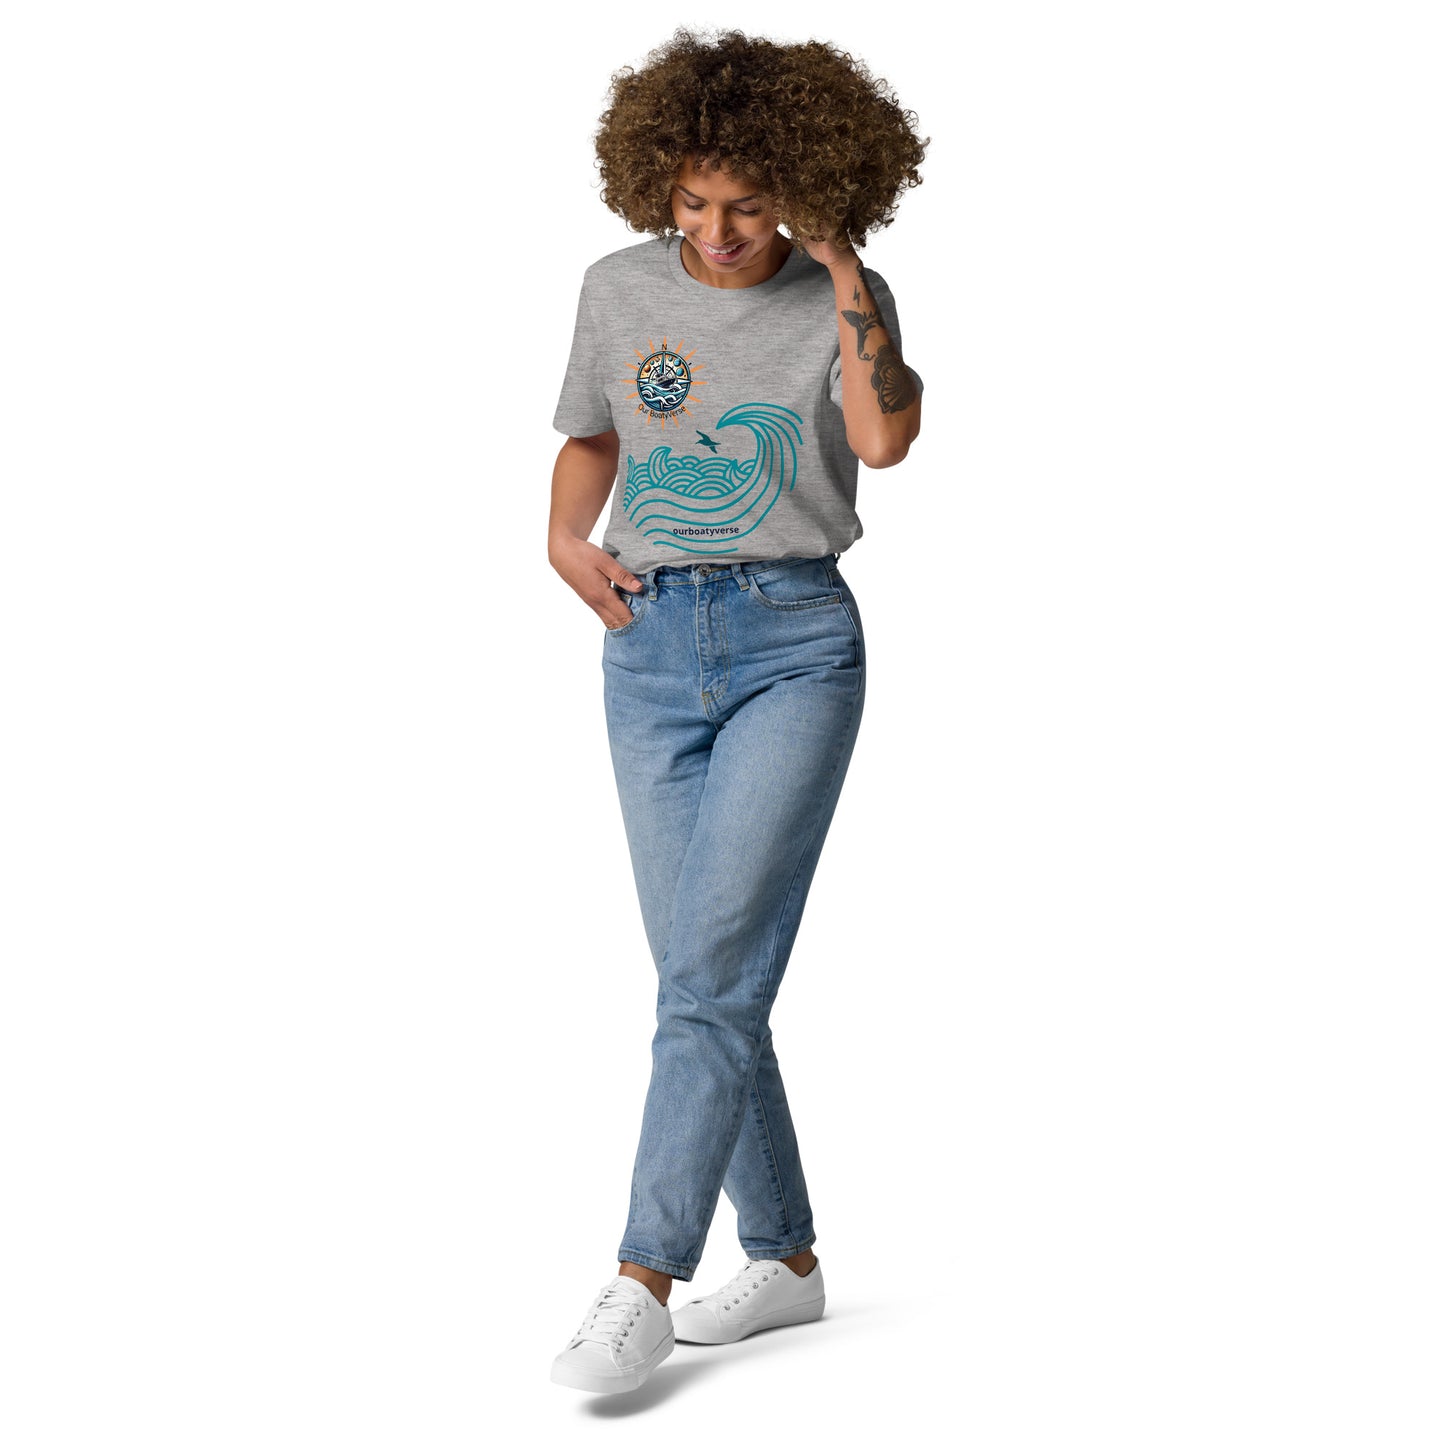 Women's Sun, Sea & Waves Organic Eco-Friendly Cotton T-shirt by Our BoatyVerse